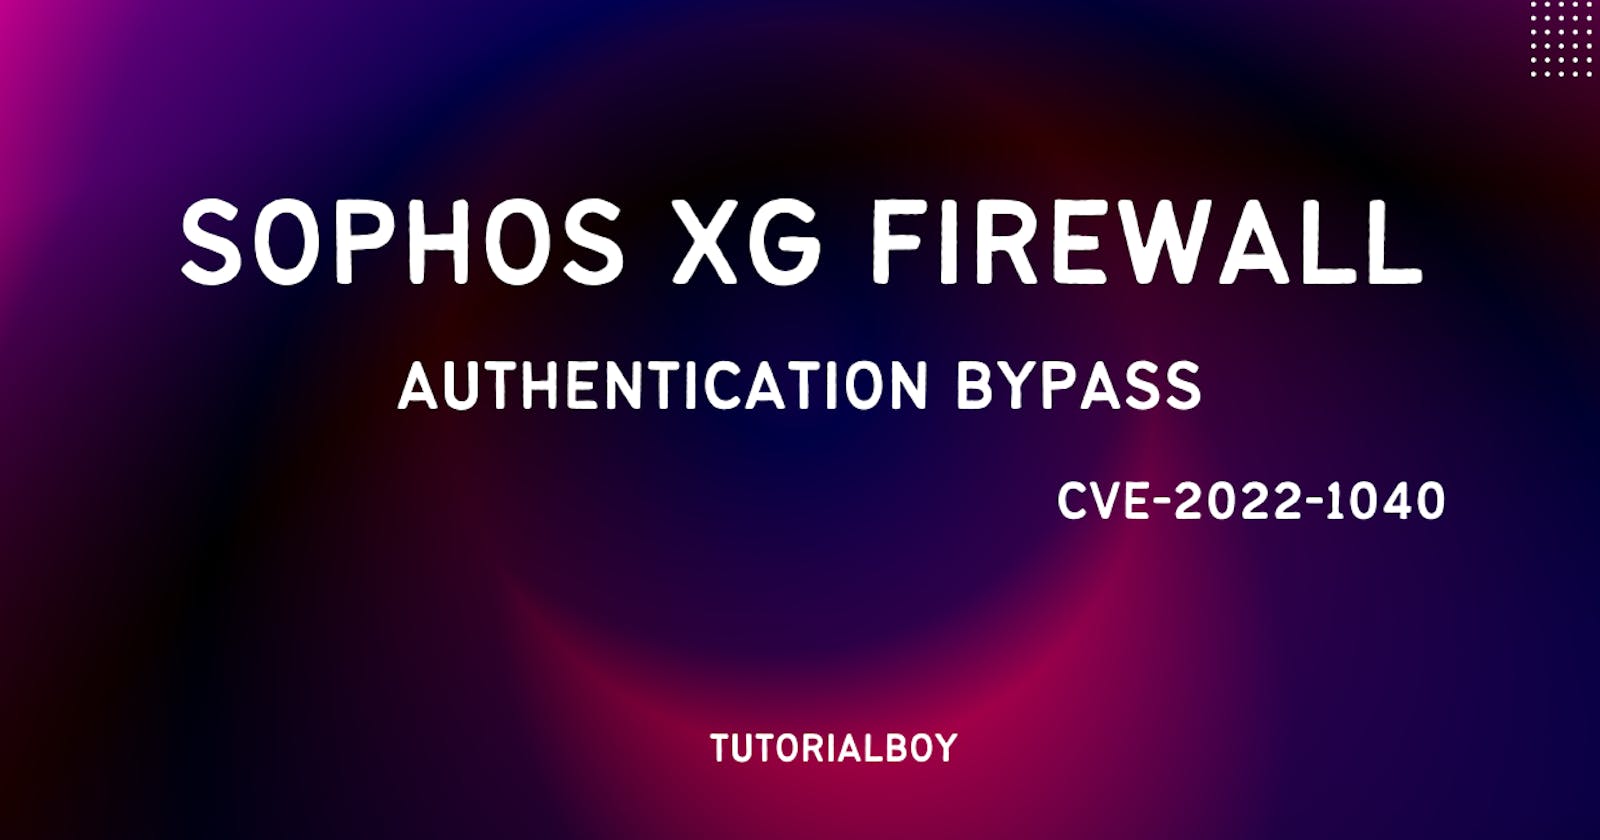 Sophos XG Firewall Authentication bypass allowing Remote Code Execution - CVE-2022-1040